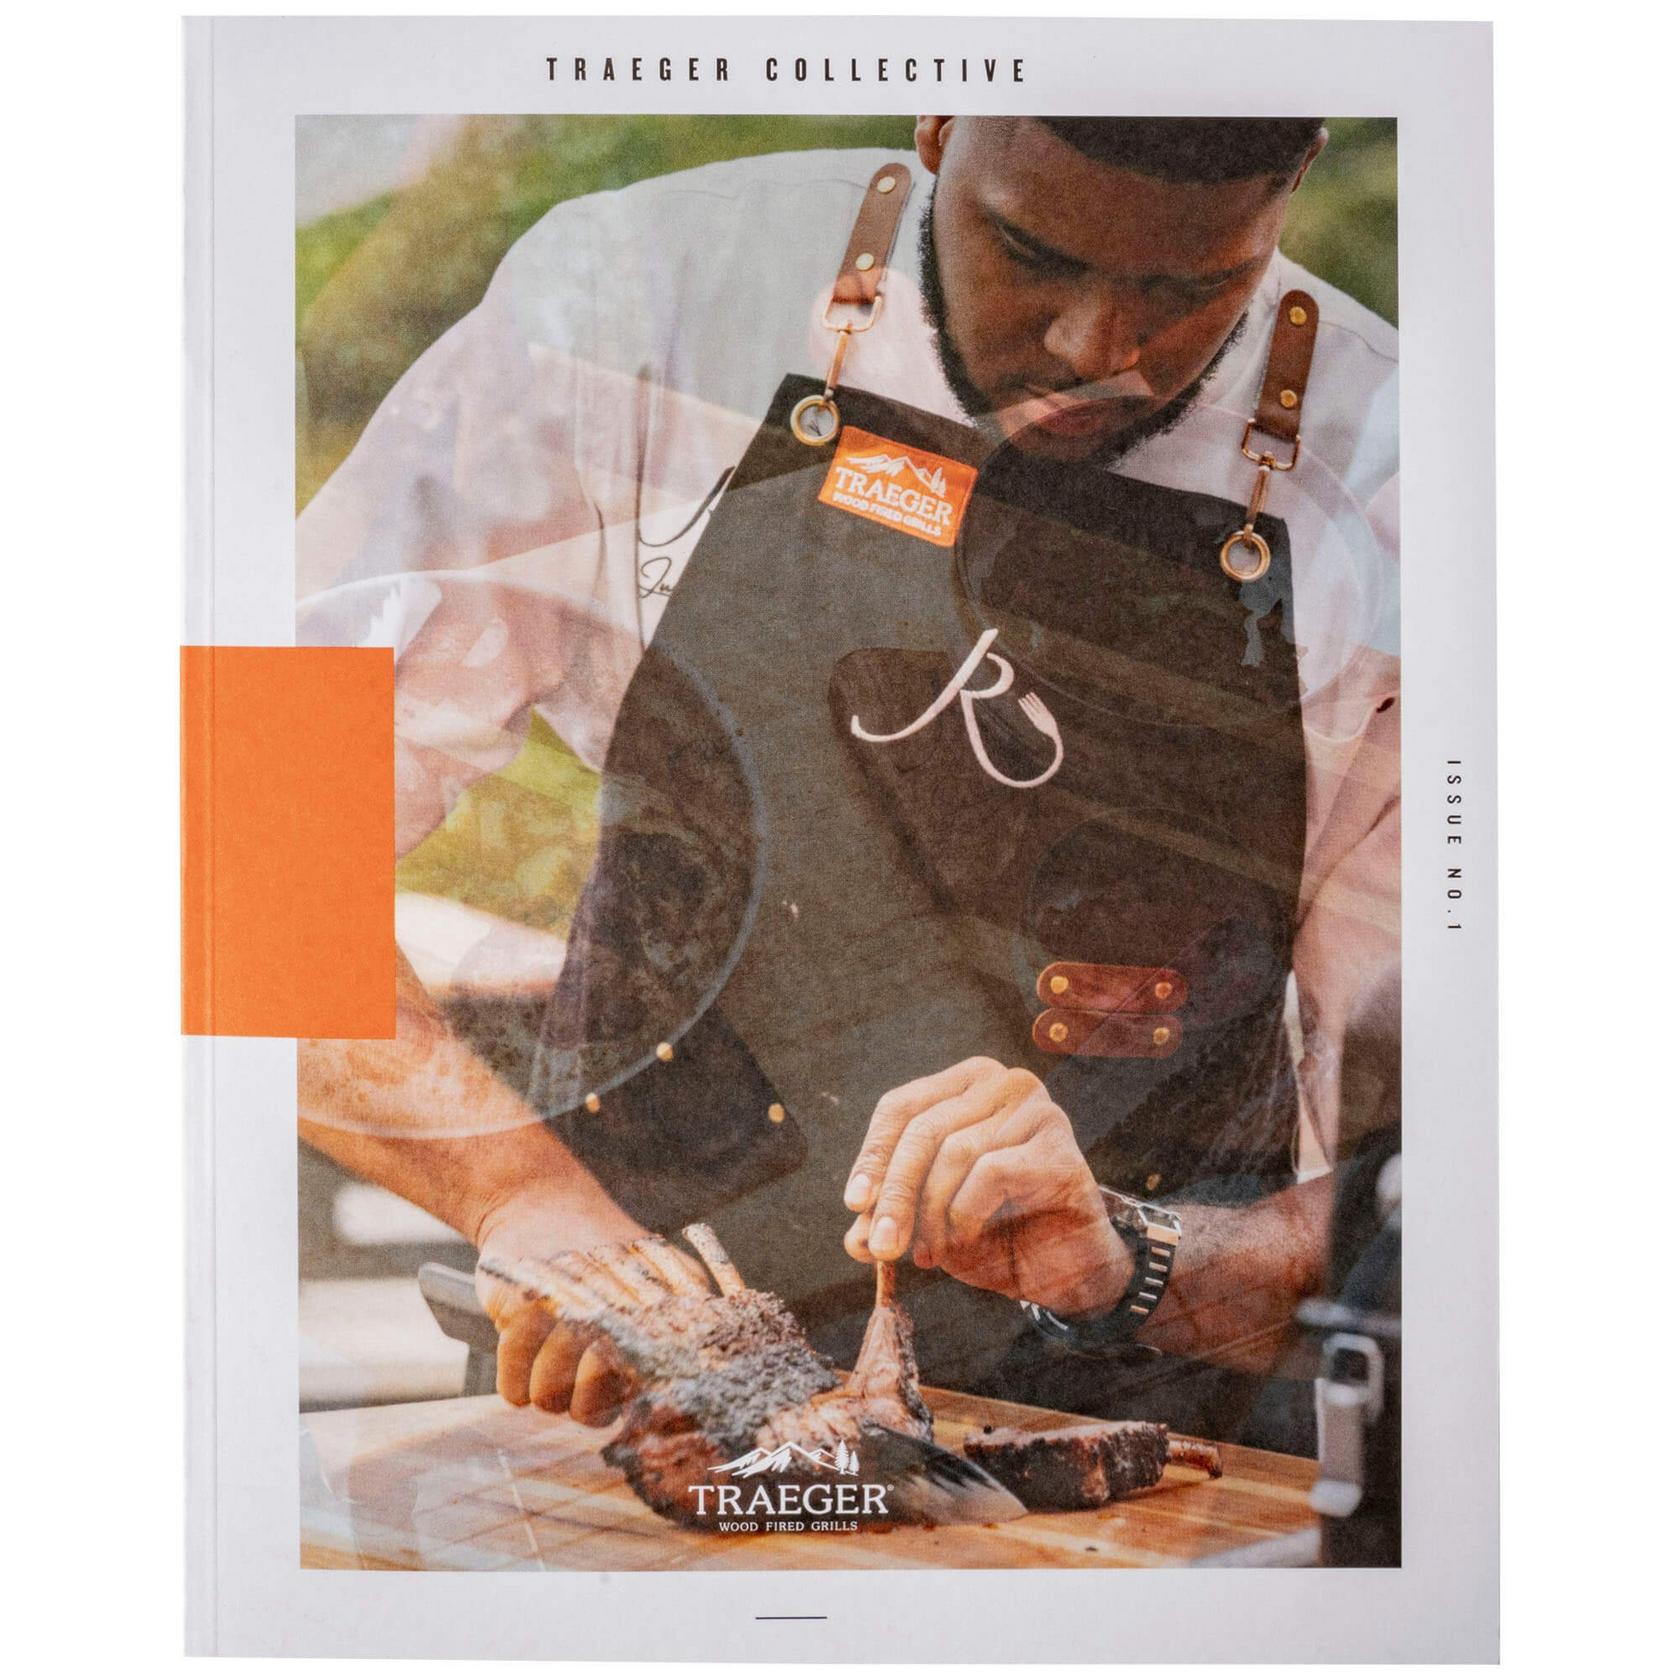 issue 1 of Traeger Collective